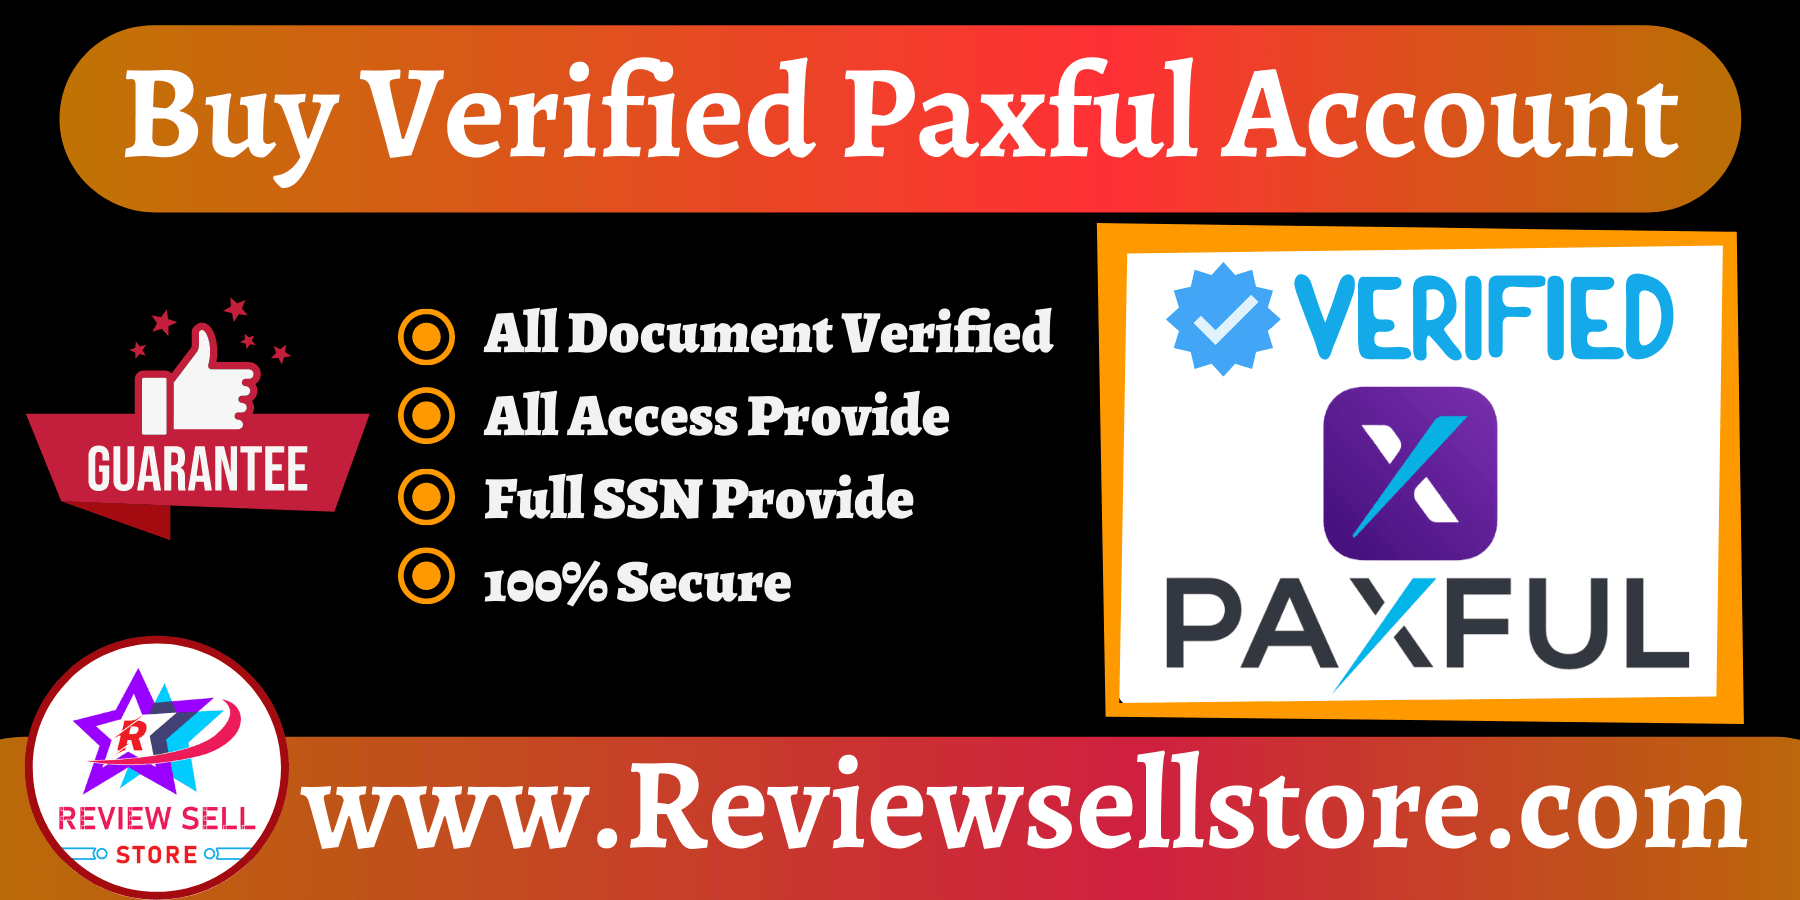 Buy Verified Paxful Account Best - 100% USA,UK,CA Paxful